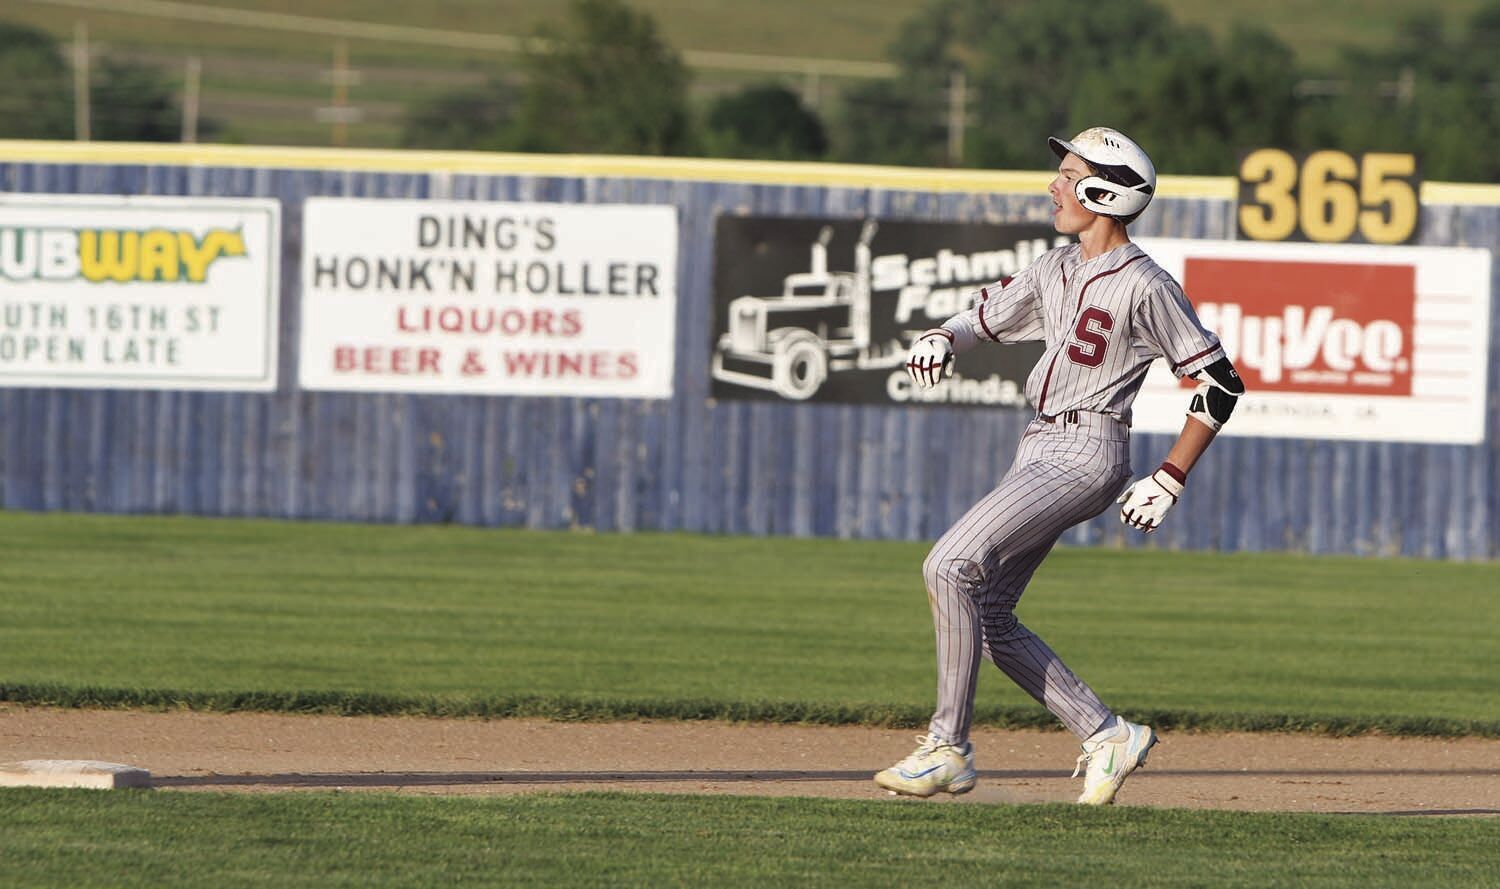 Logan Twyman Leads Mustangs to Victory with Tyler Babe’s Game-Winning Hit